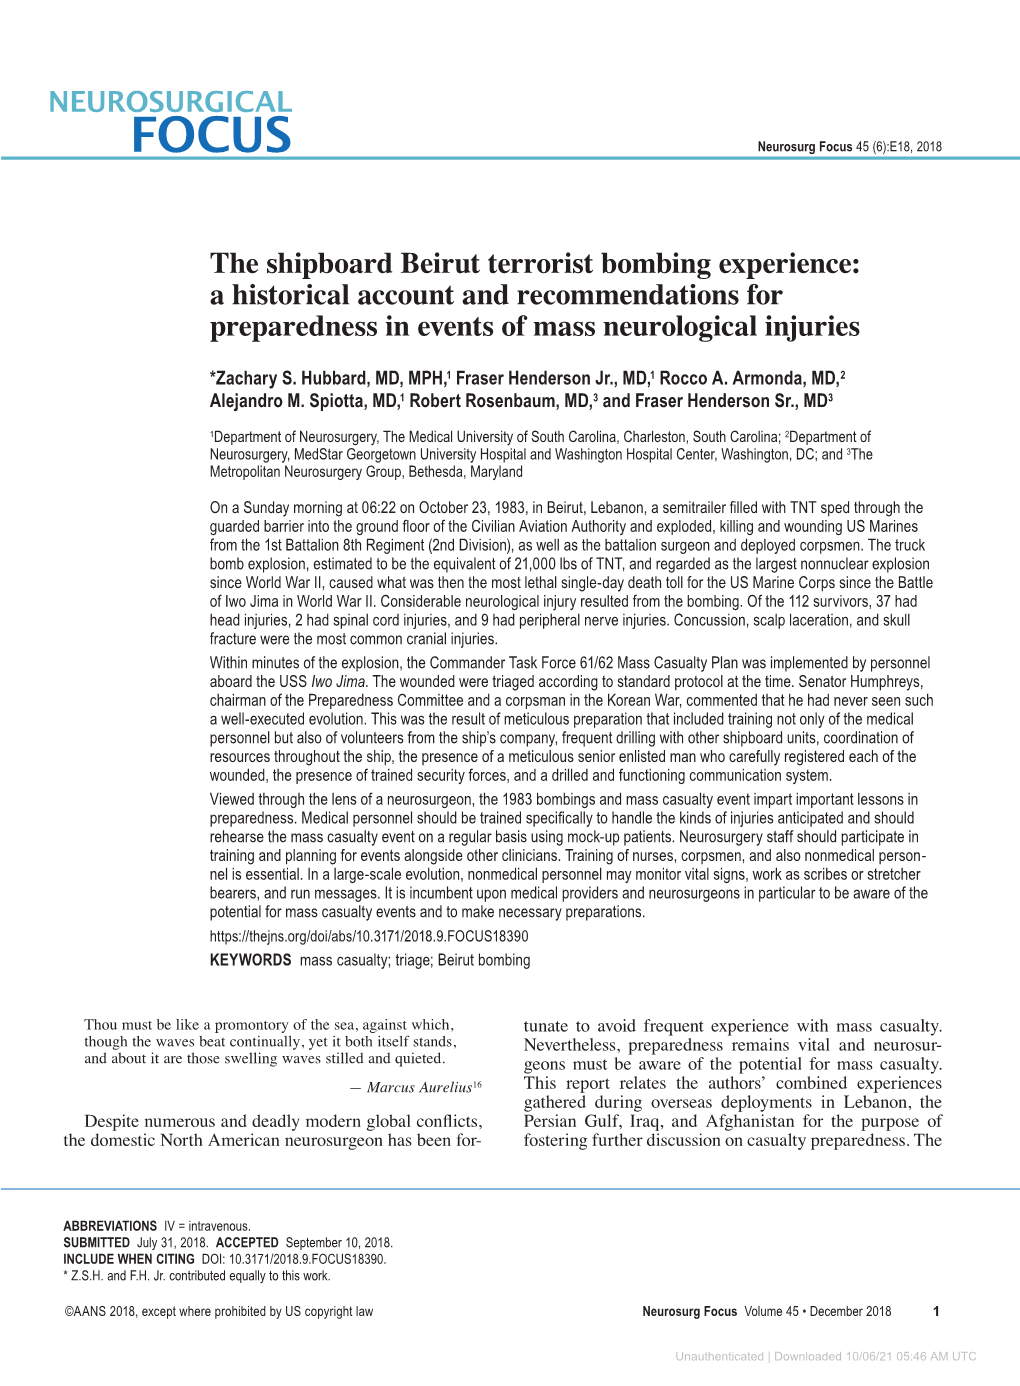 The Shipboard Beirut Terrorist Bombing Experience: a Historical Account and Recommendations for Preparedness in Events of Mass Neurological Injuries